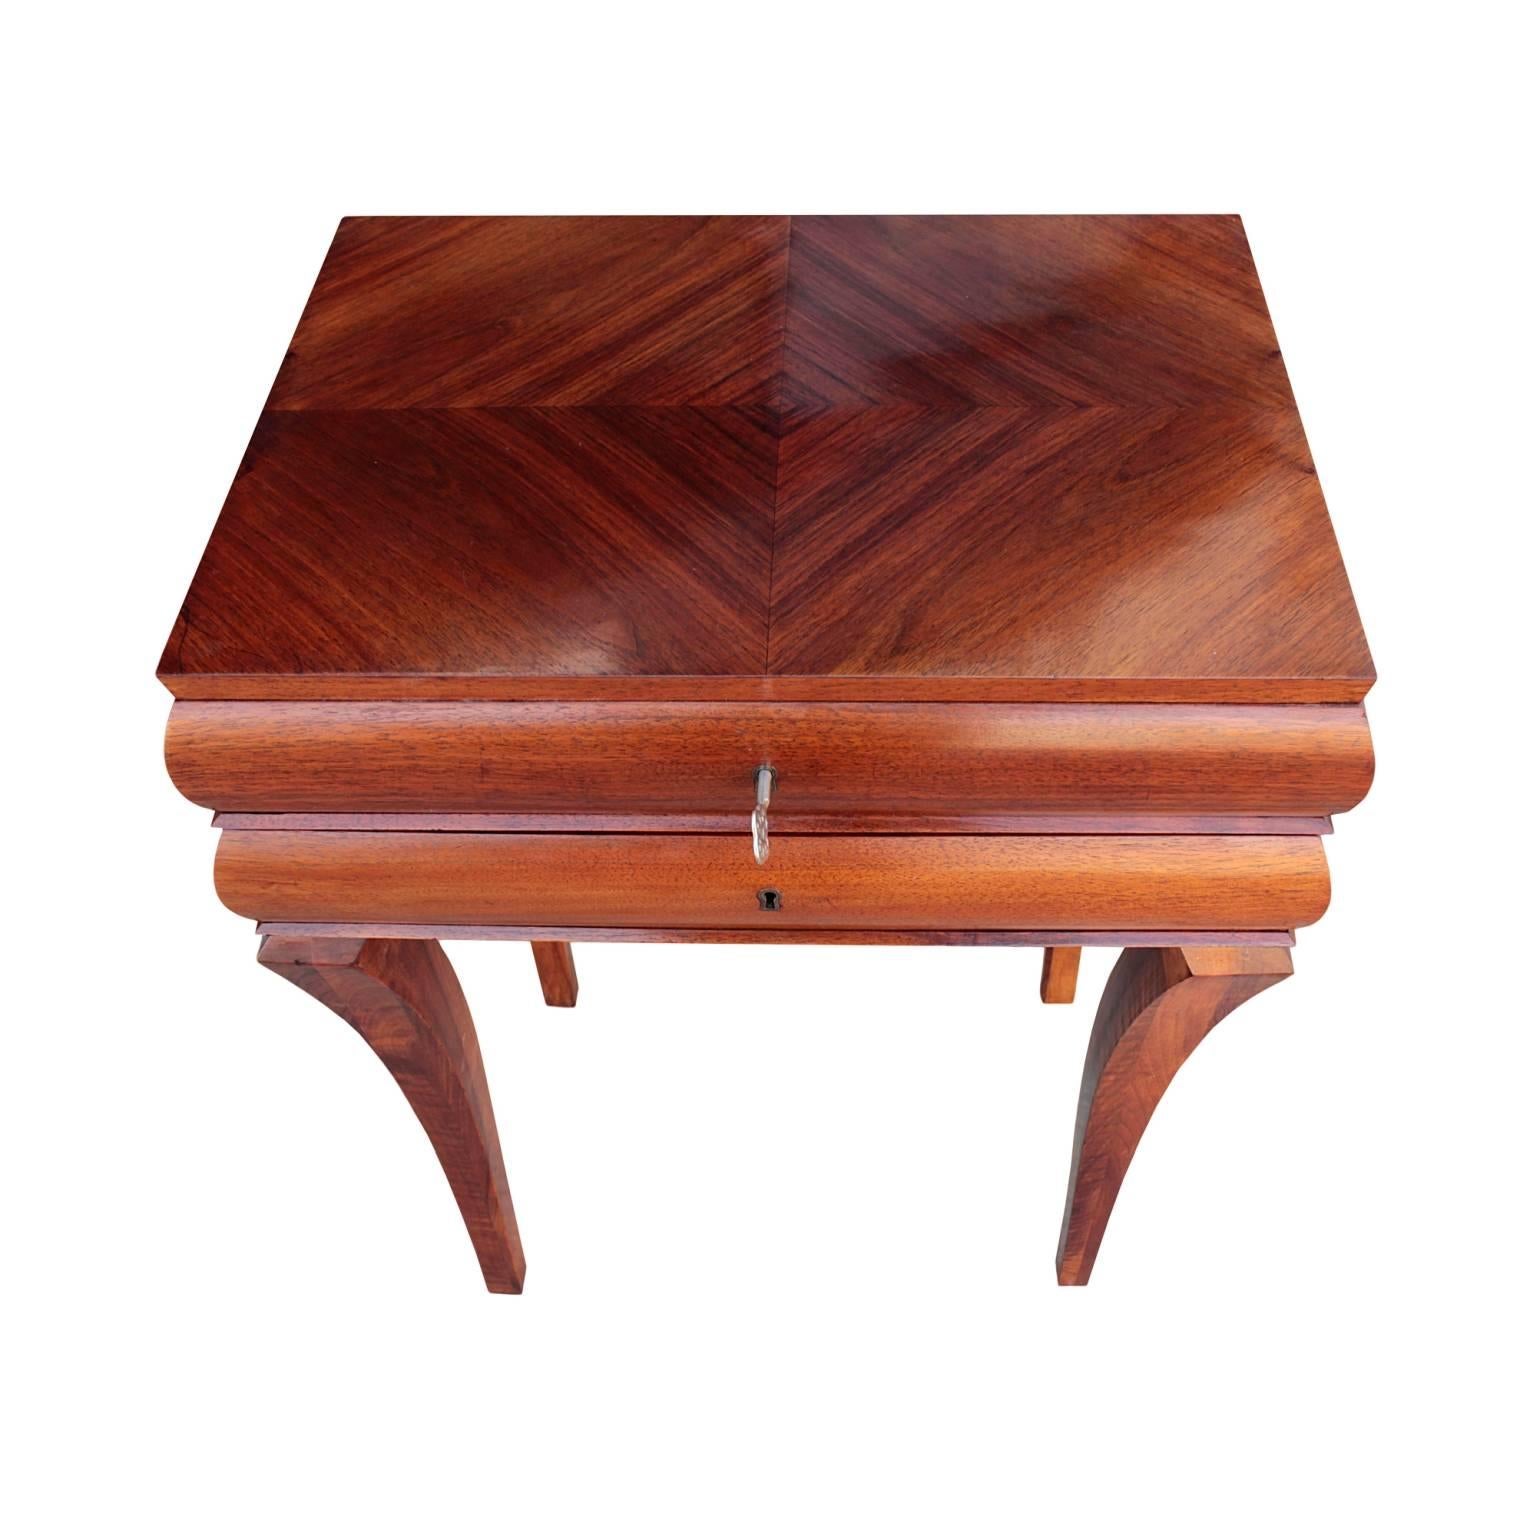 German Art Deco Period Rectangular Side Table  For Sale 2